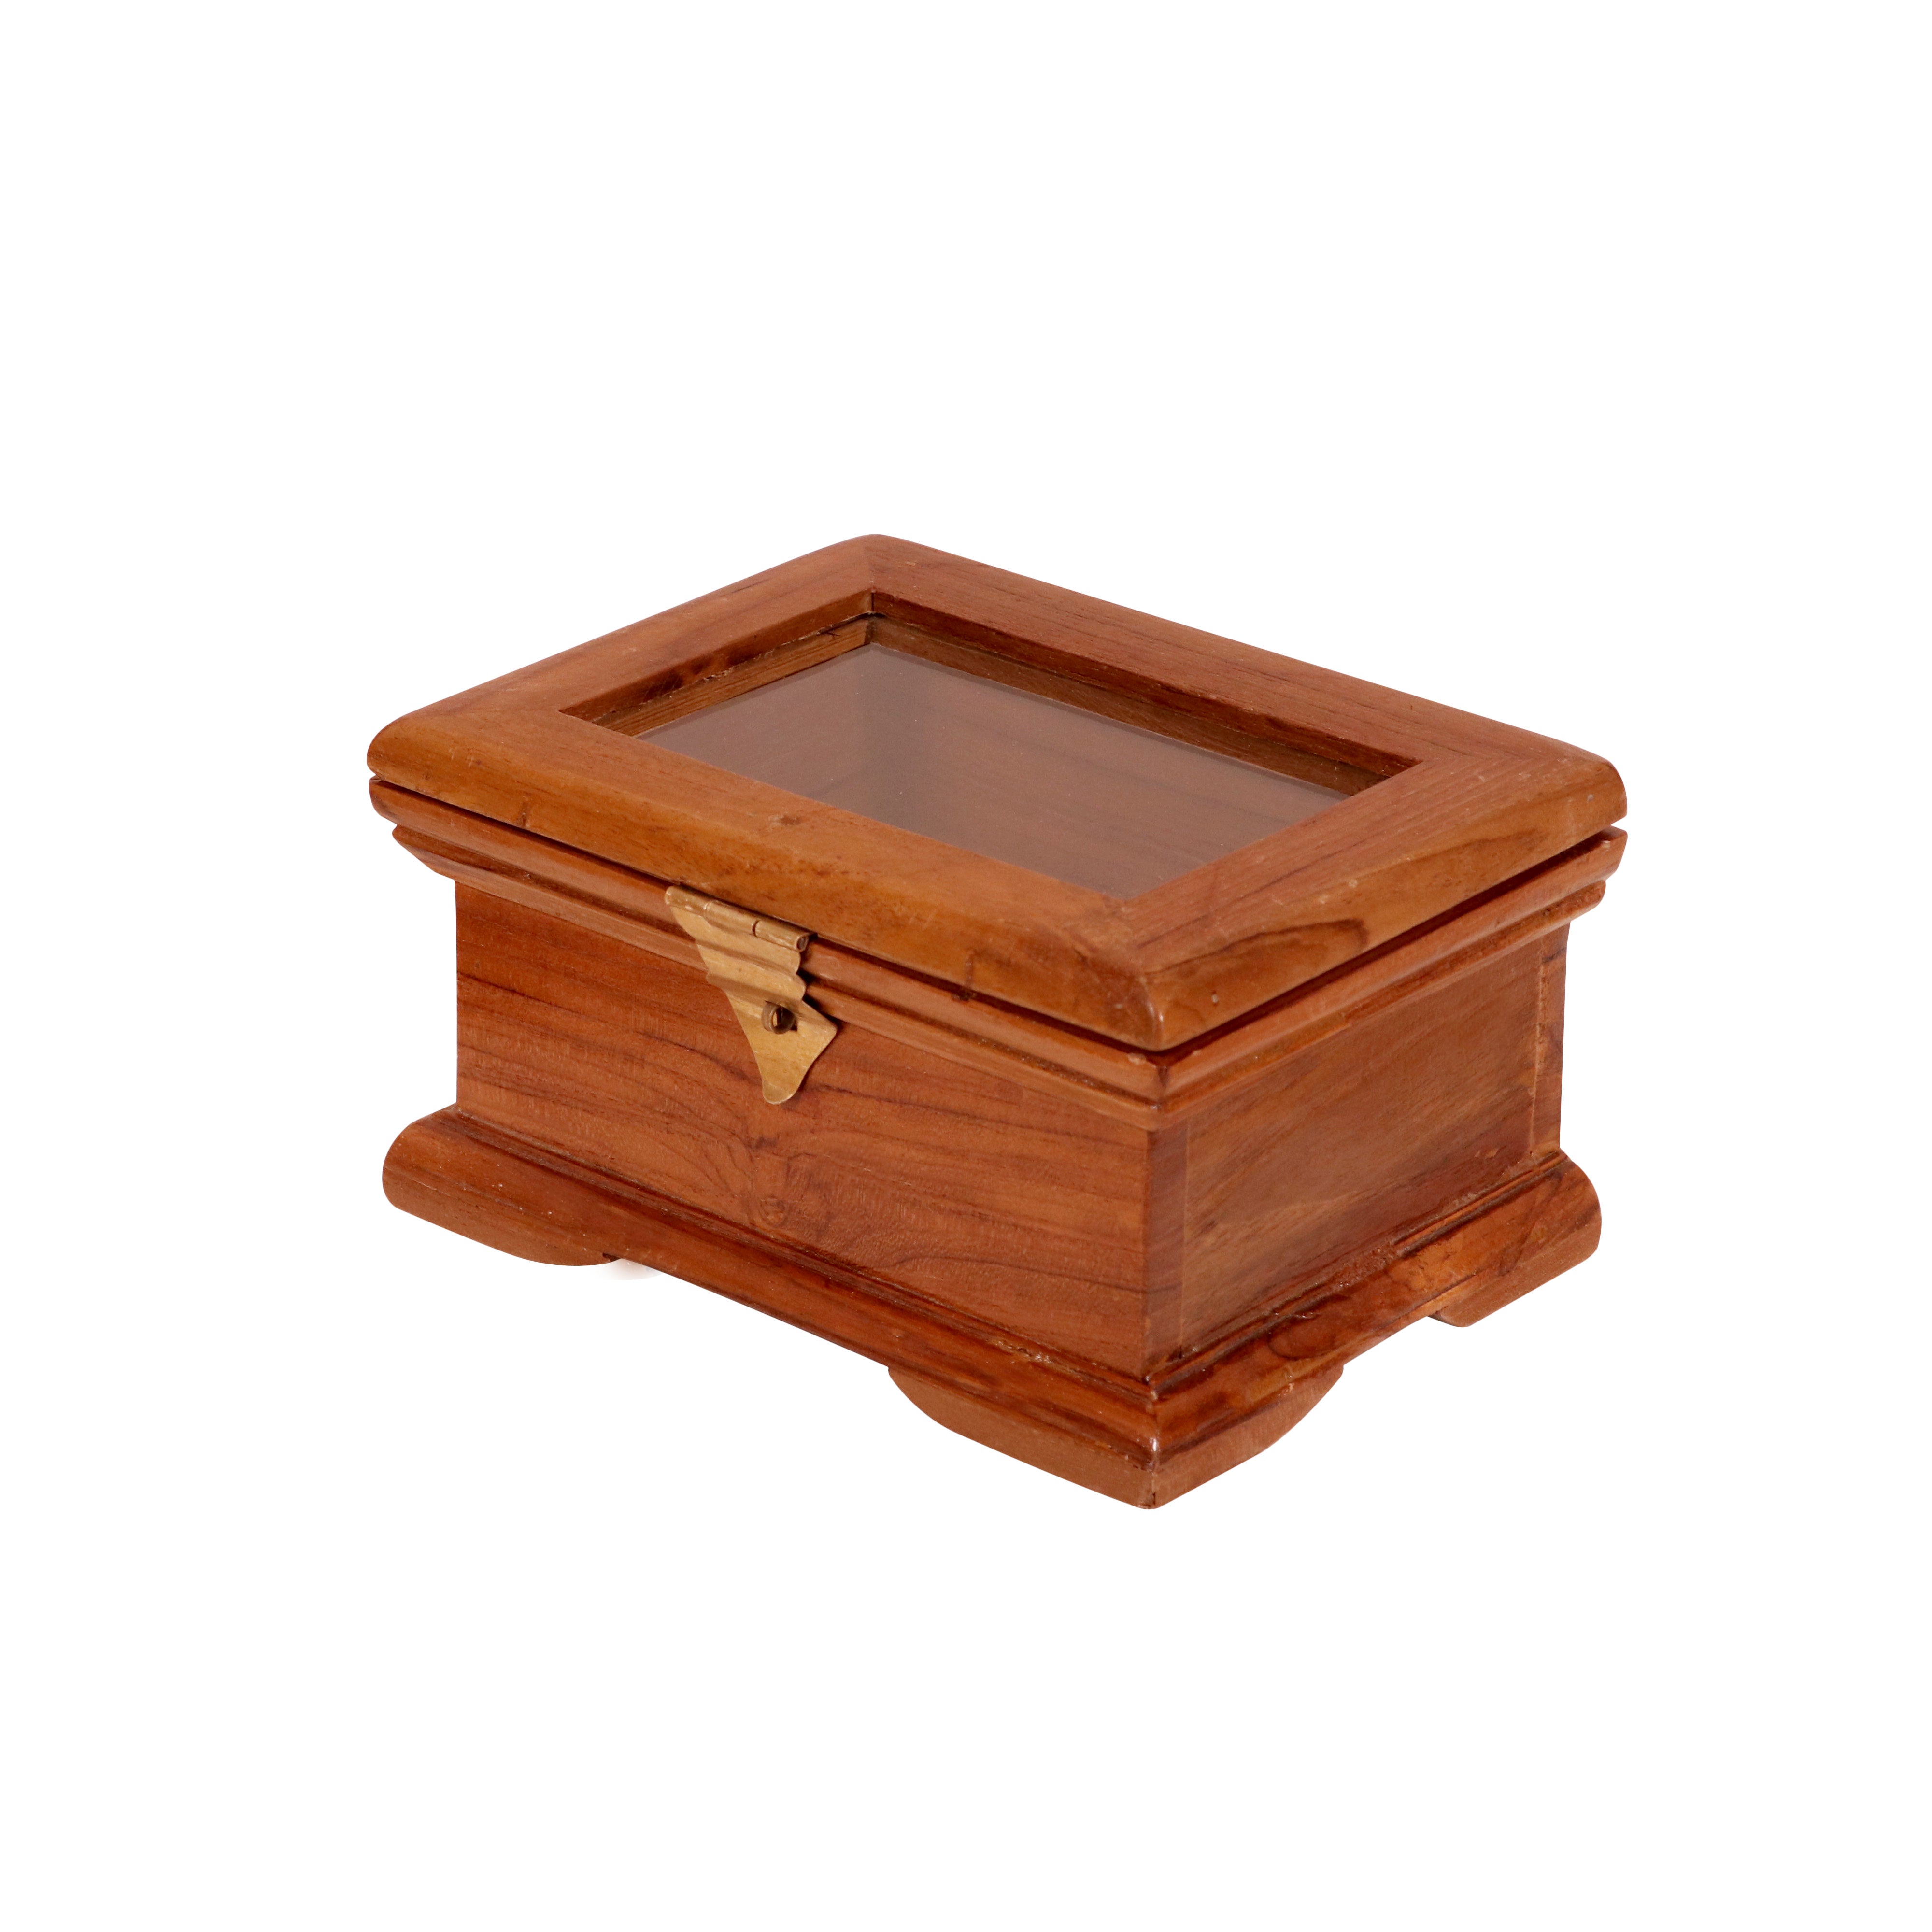 Optimised Colonial Handmade Top Mirror Vintage Wooden Jewelry Box Wooden Box